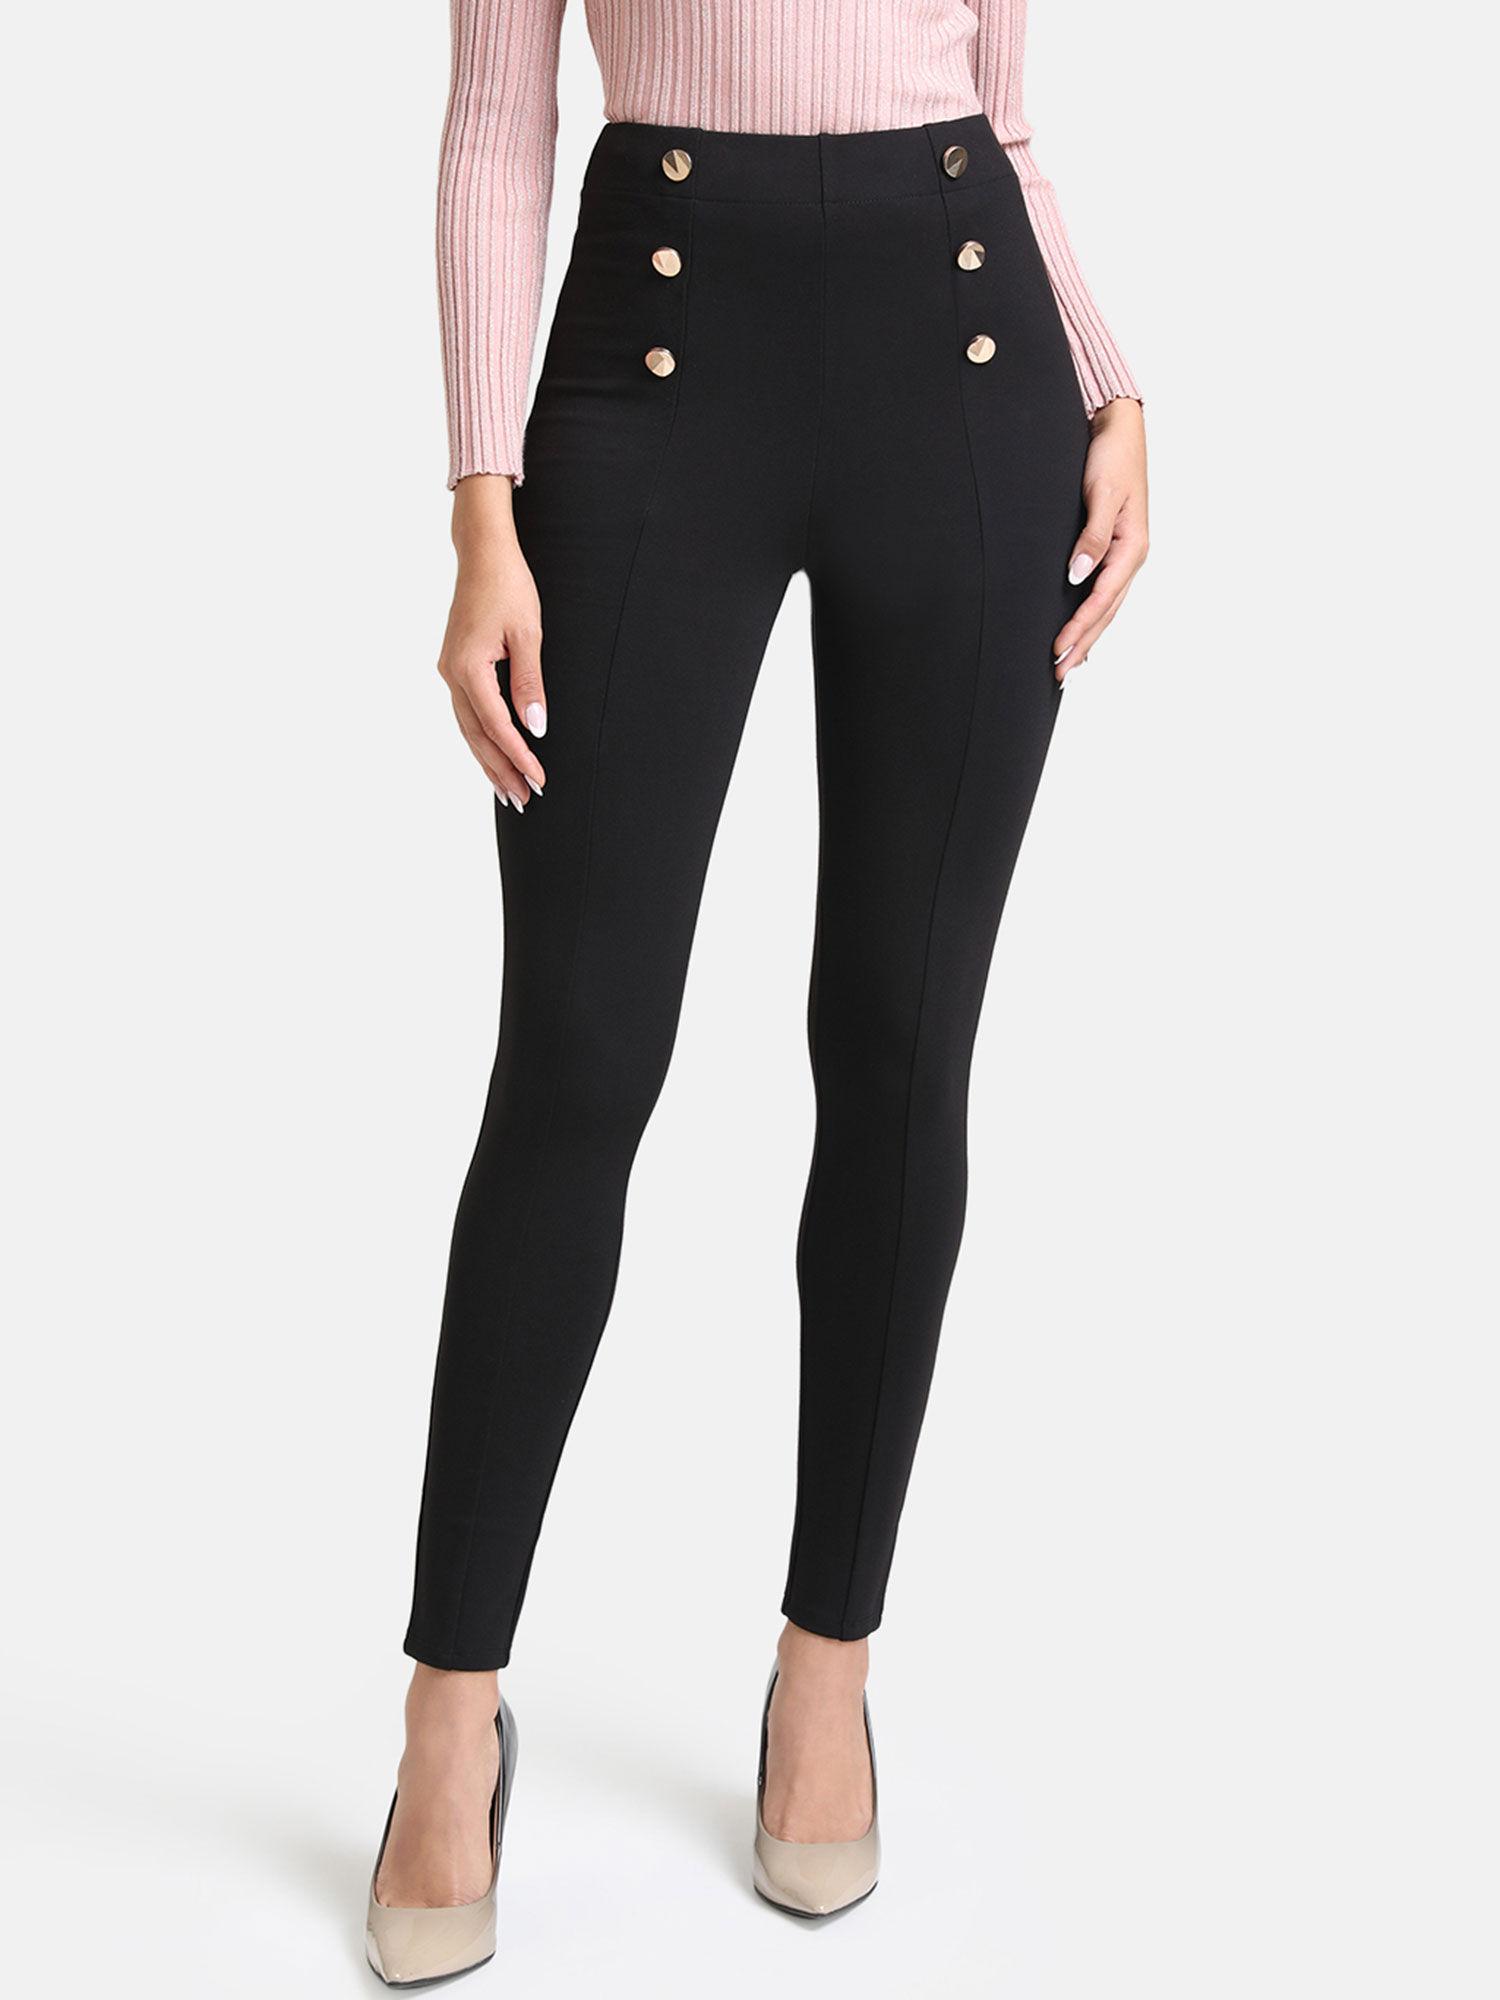 Black Solid Jegging With Metal Buttons